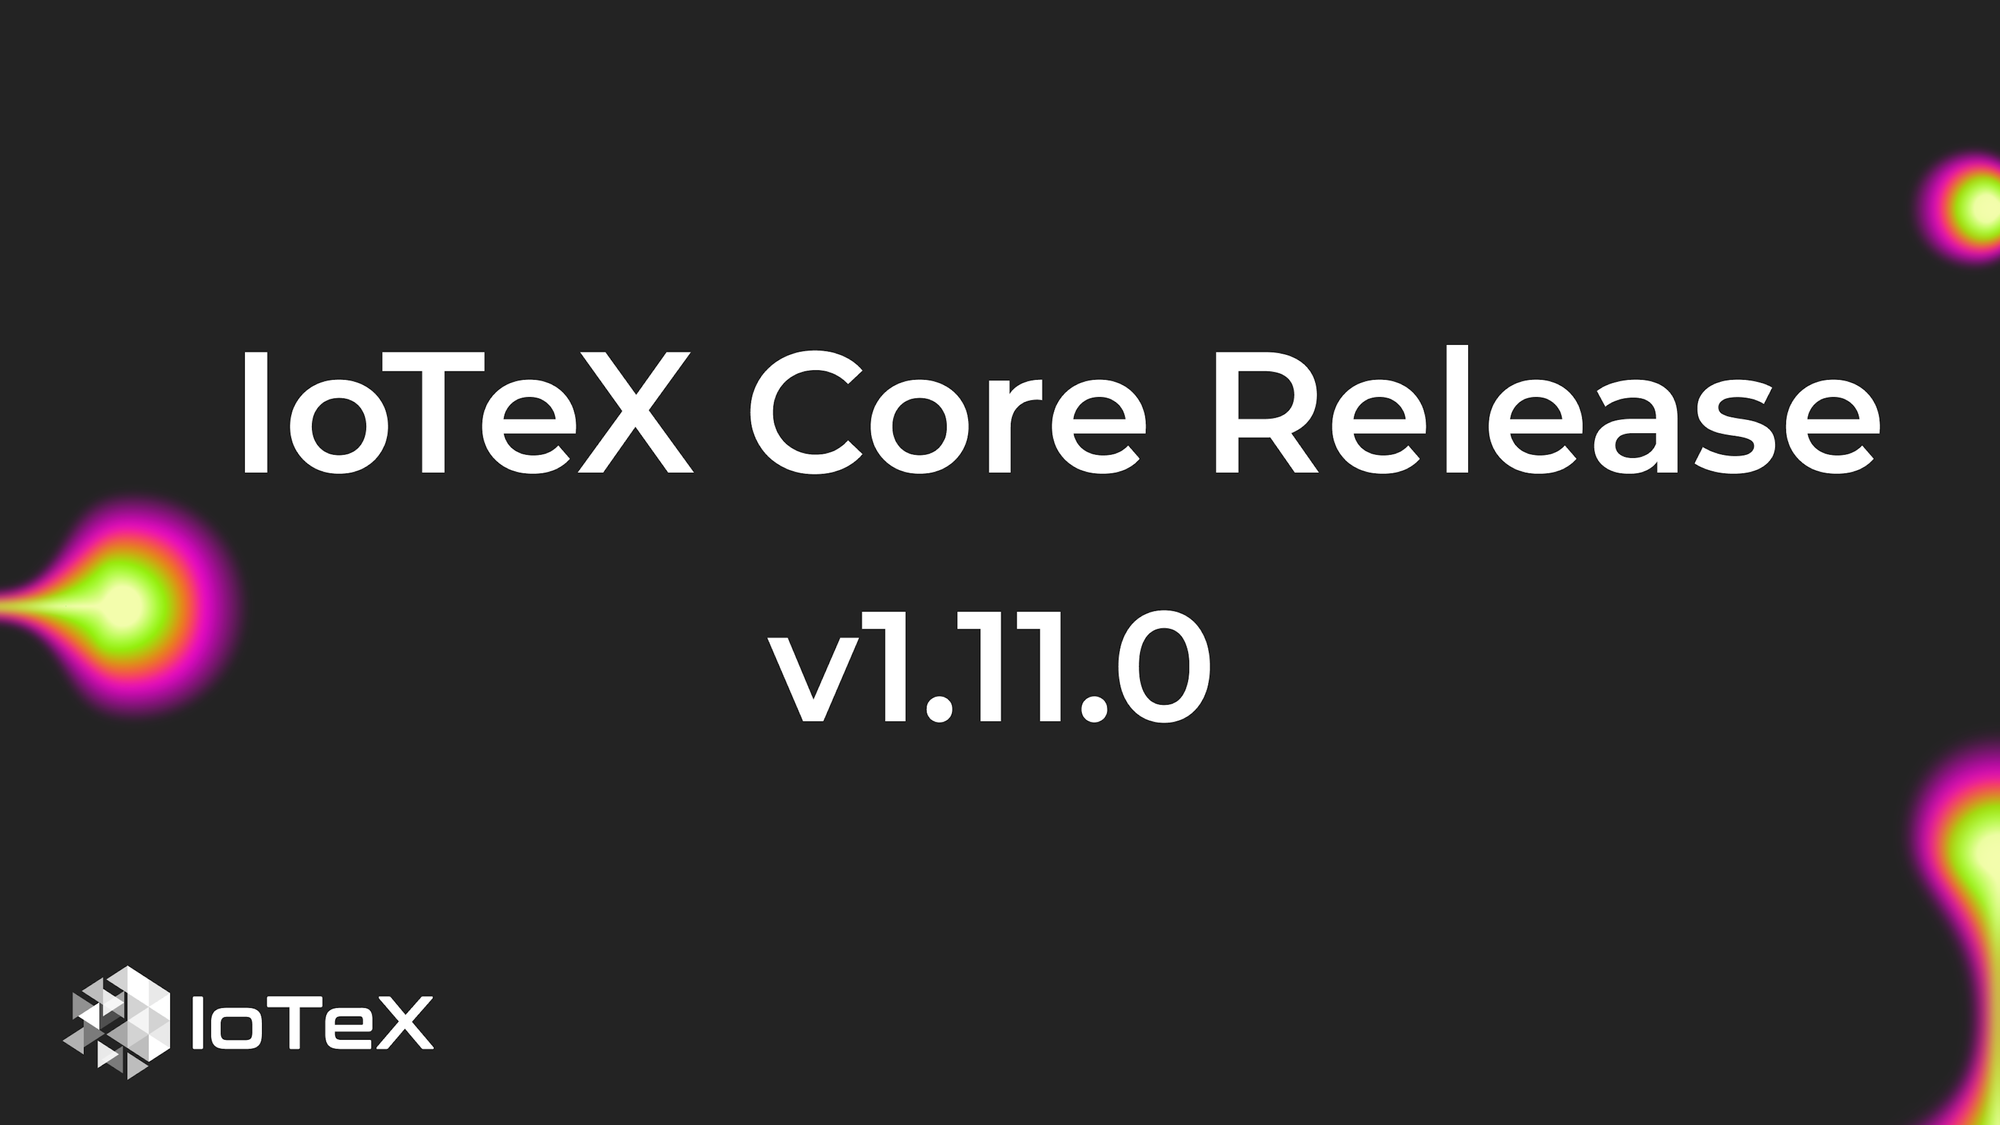 iotex-core-1-11-0-a-significant-leap-forward